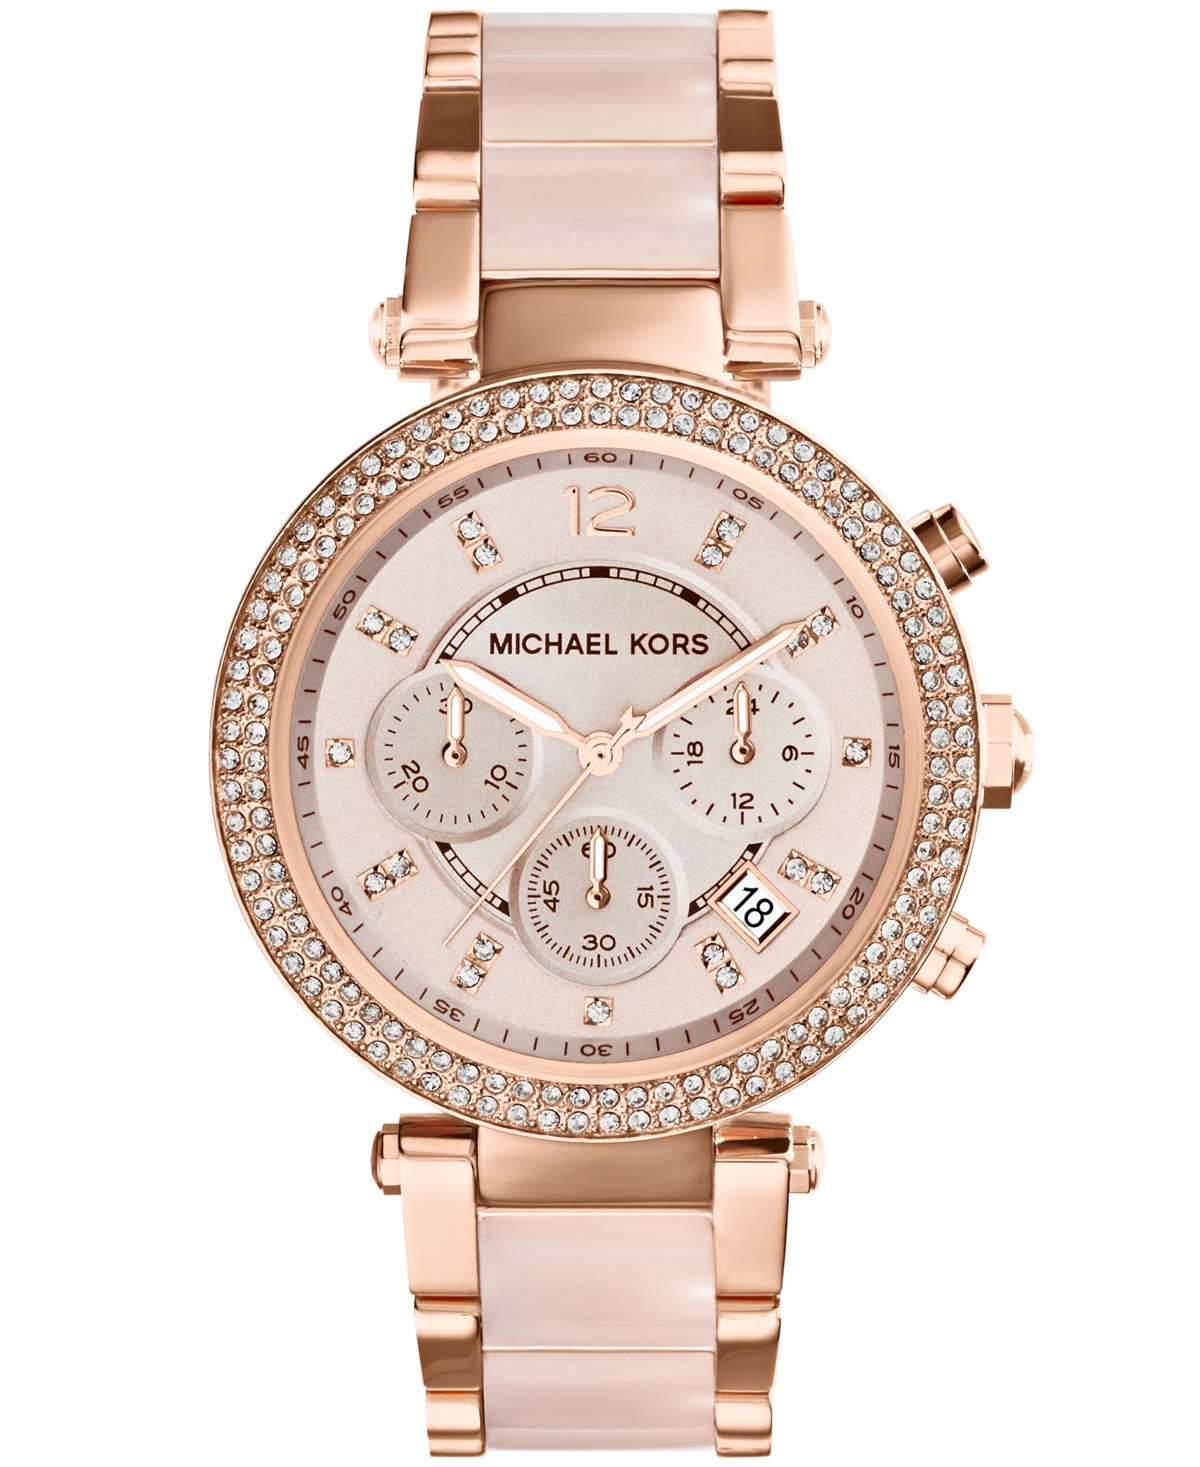 Women's Chronograph Parker Blush and Rose Gold-Tone Stainless Steel Bracelet Watch 39mm MK5896 - Two-Tone